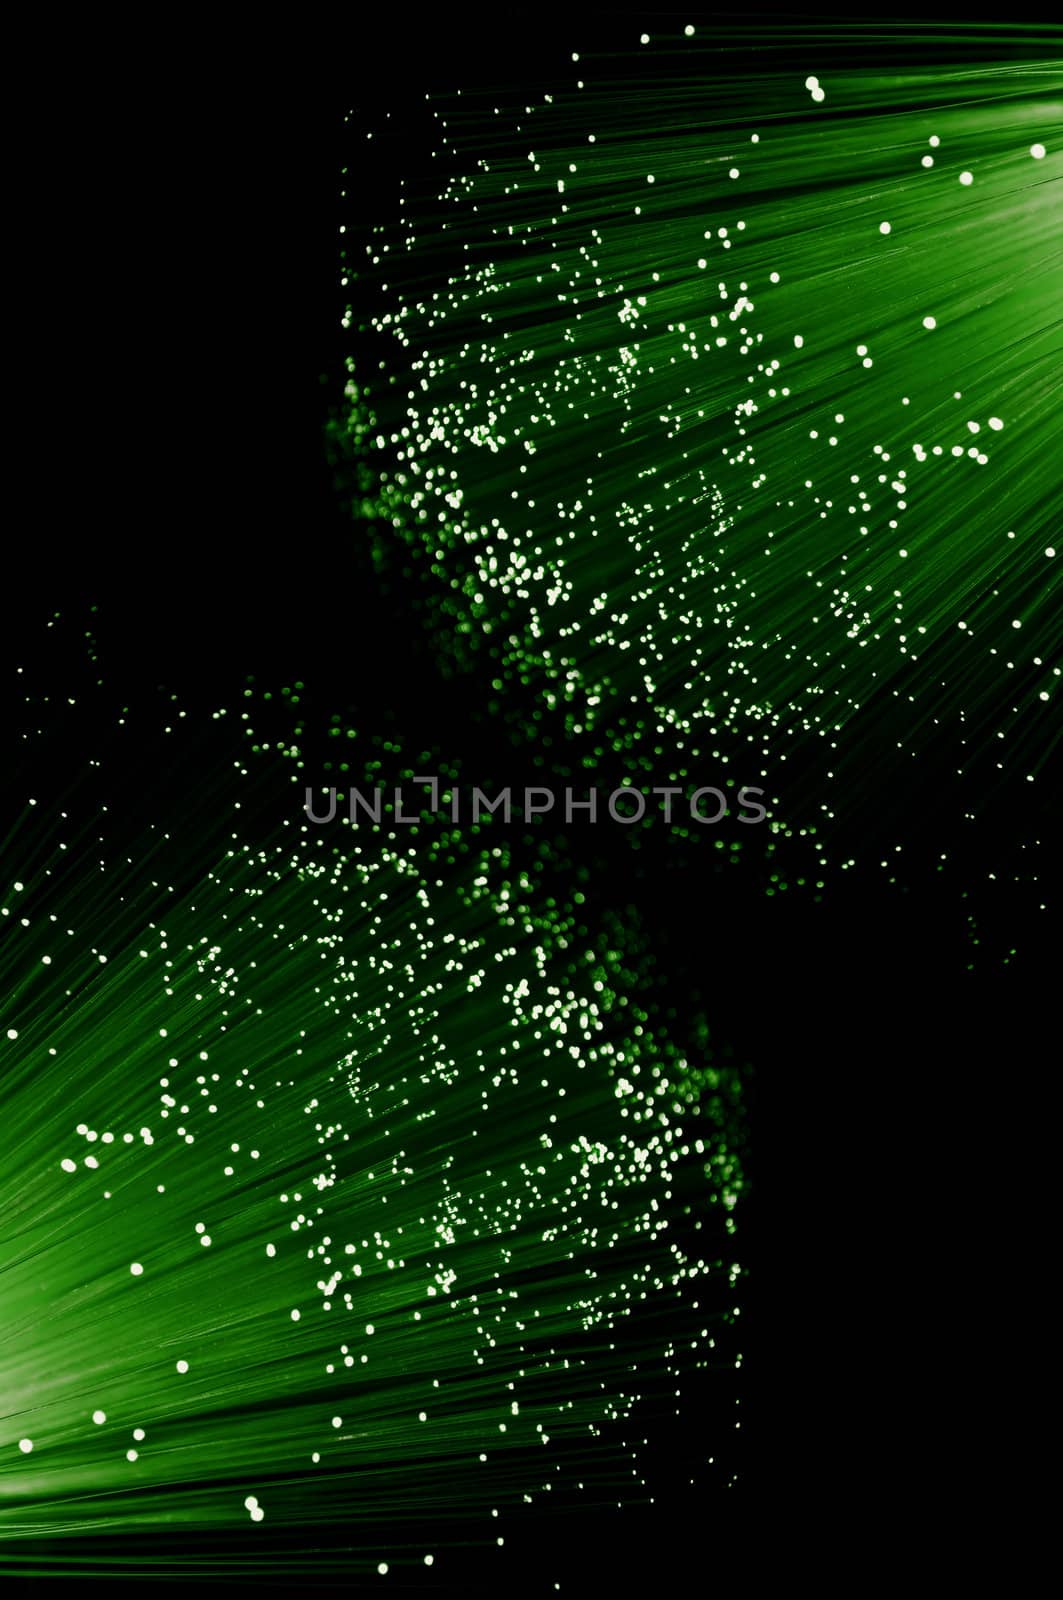 Close up capturing the ends of many illuminated green fibre optic light strands arranged against black.